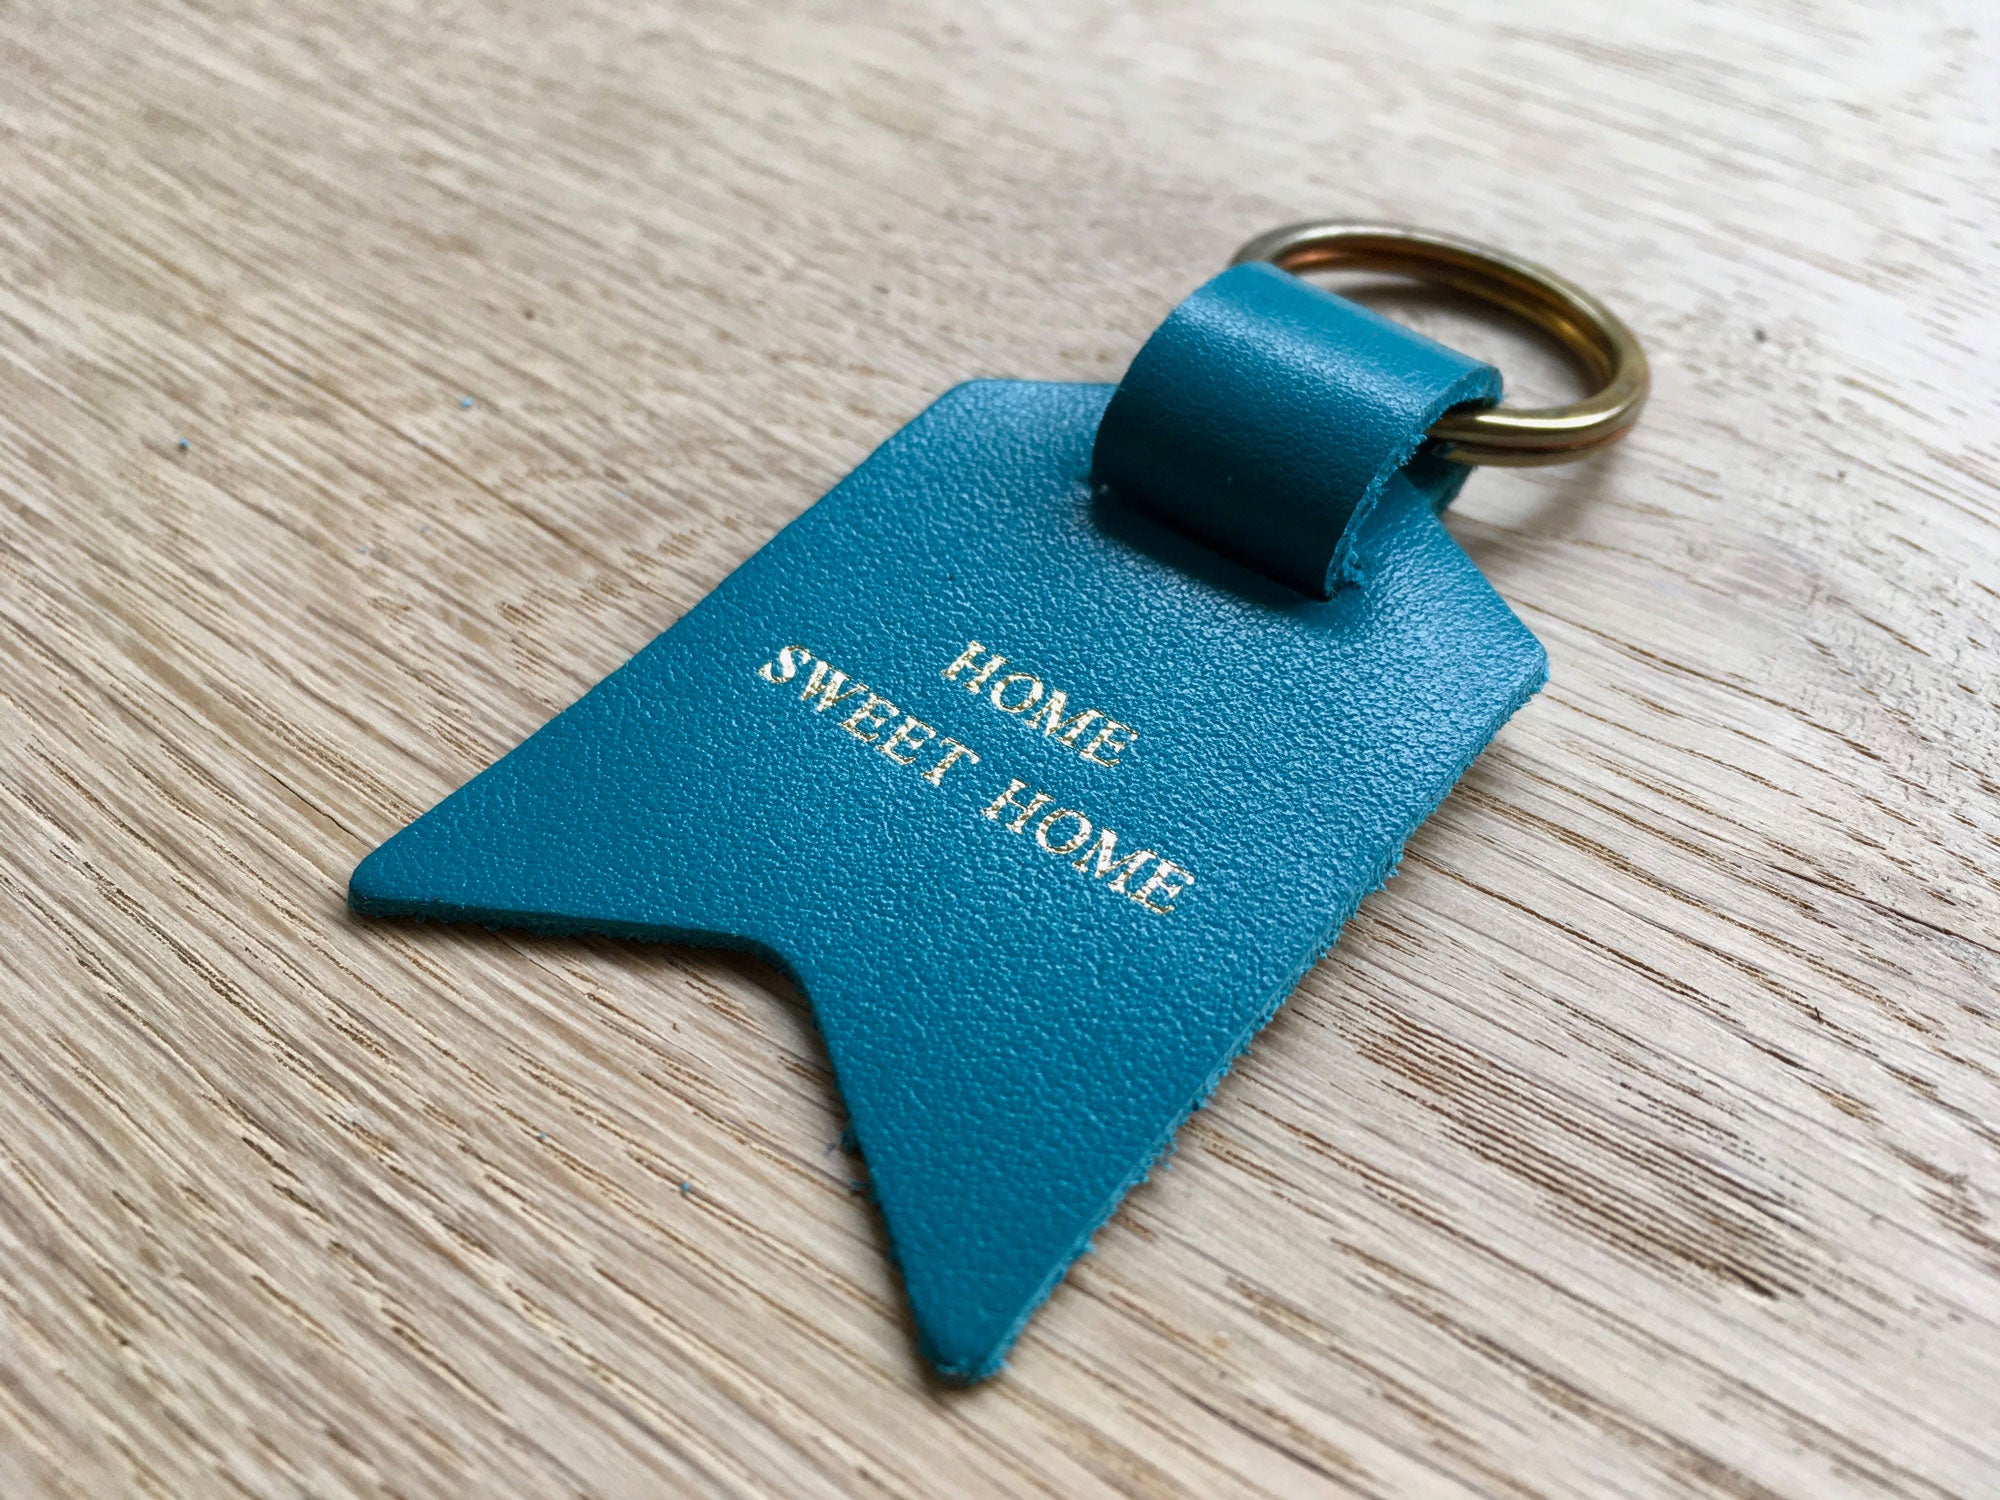 Second Sale – Home Sweet Home, blue Leather Keyring